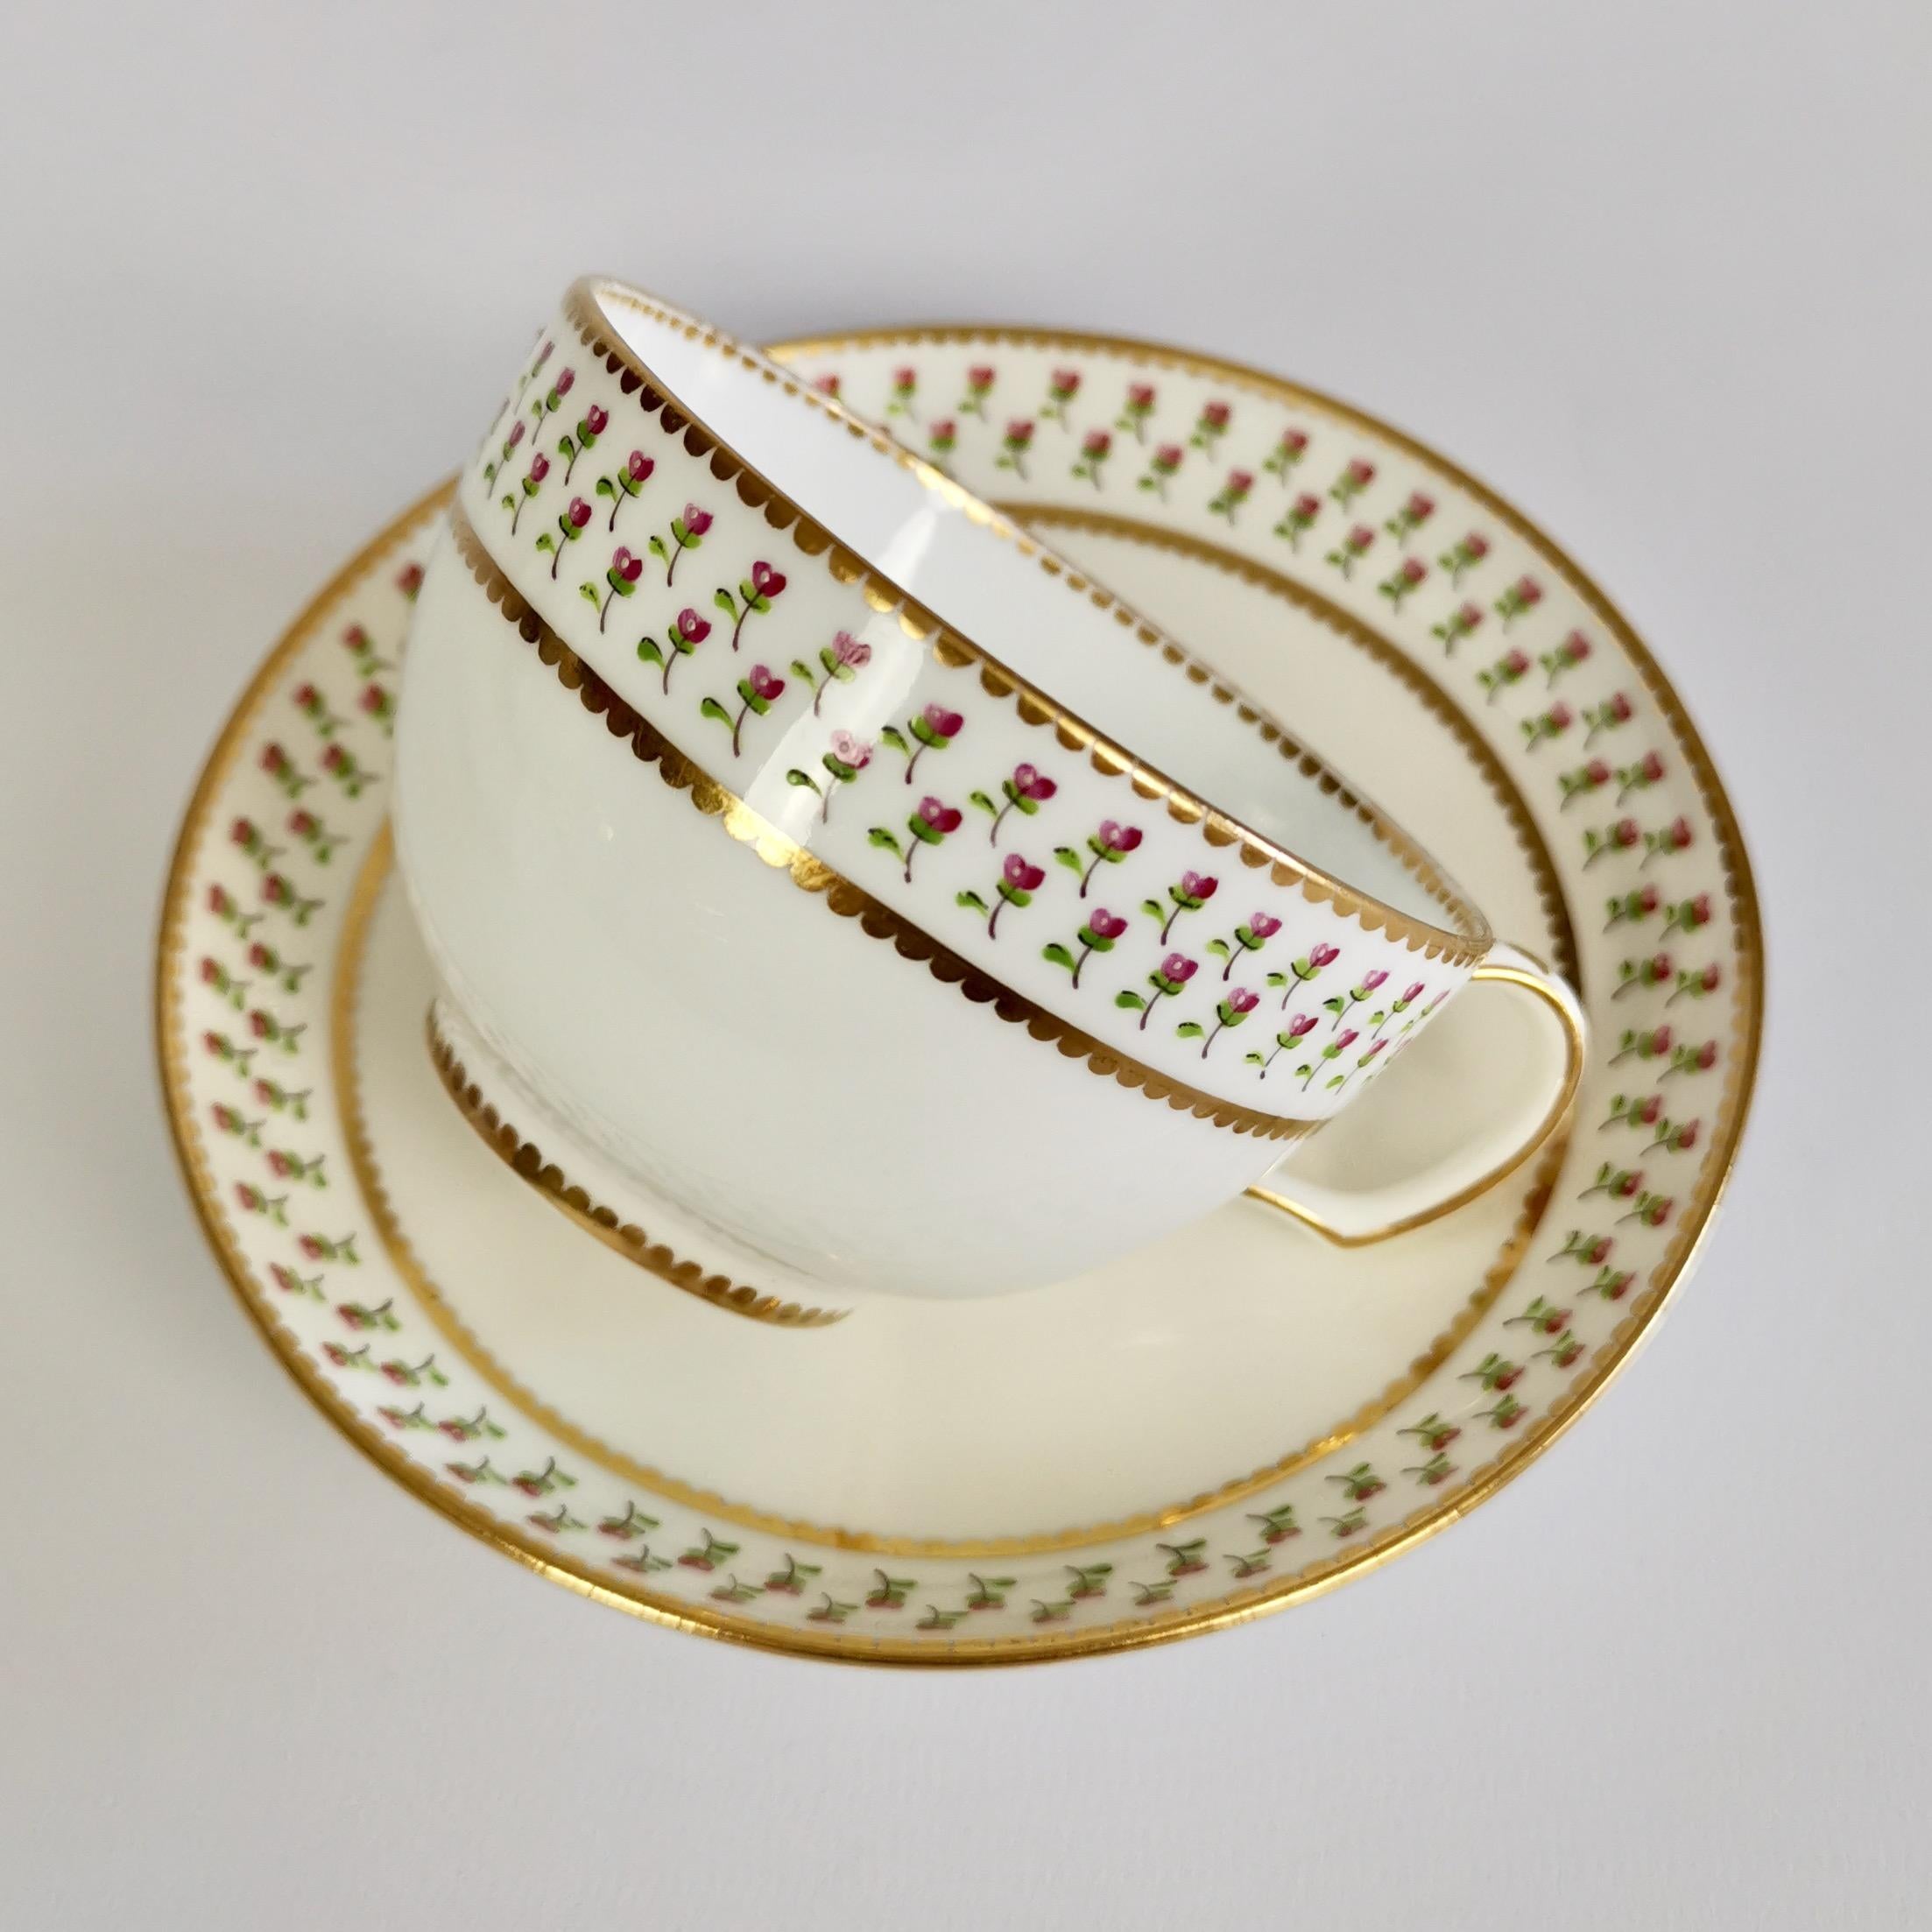 Hand-Painted Derby King Street Porcelain Teacup Trio, White with Tiny Roses, 1848-1862